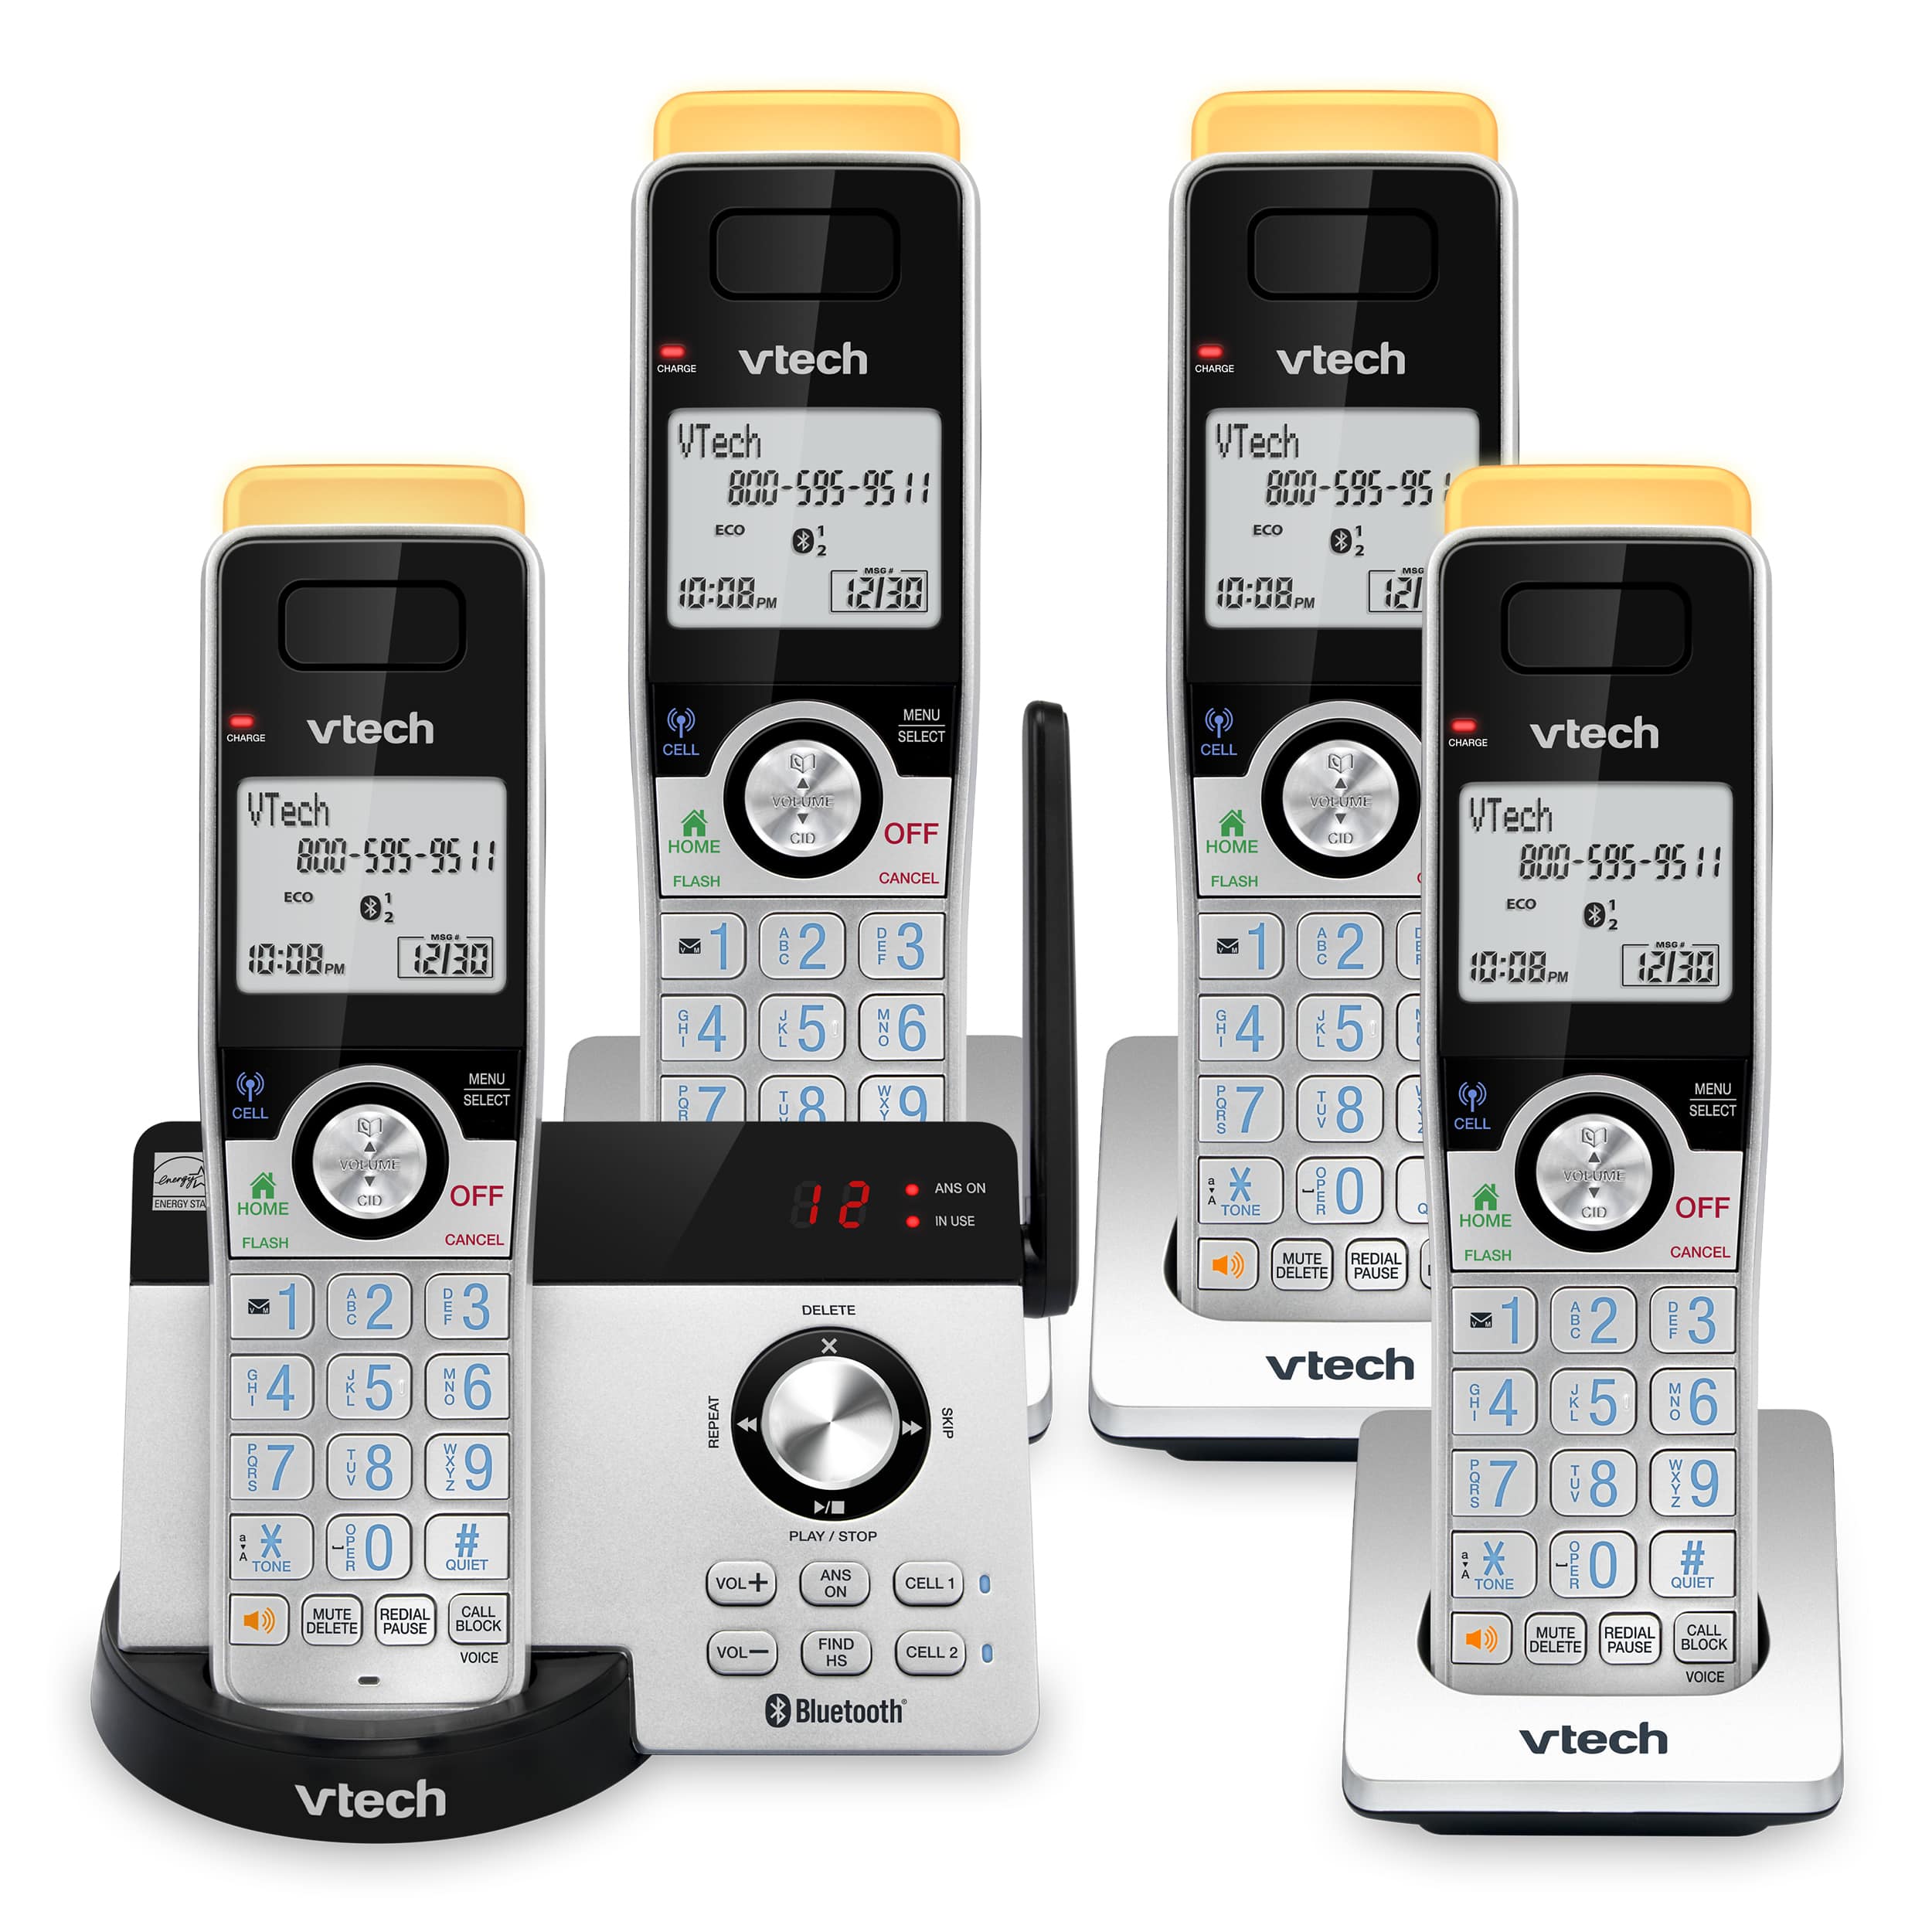 4-Handset Expandable Cordless Phone with Super Long Range, Bluetooth Connect to Cell, Smart Call Blocker and Answering System - view 1